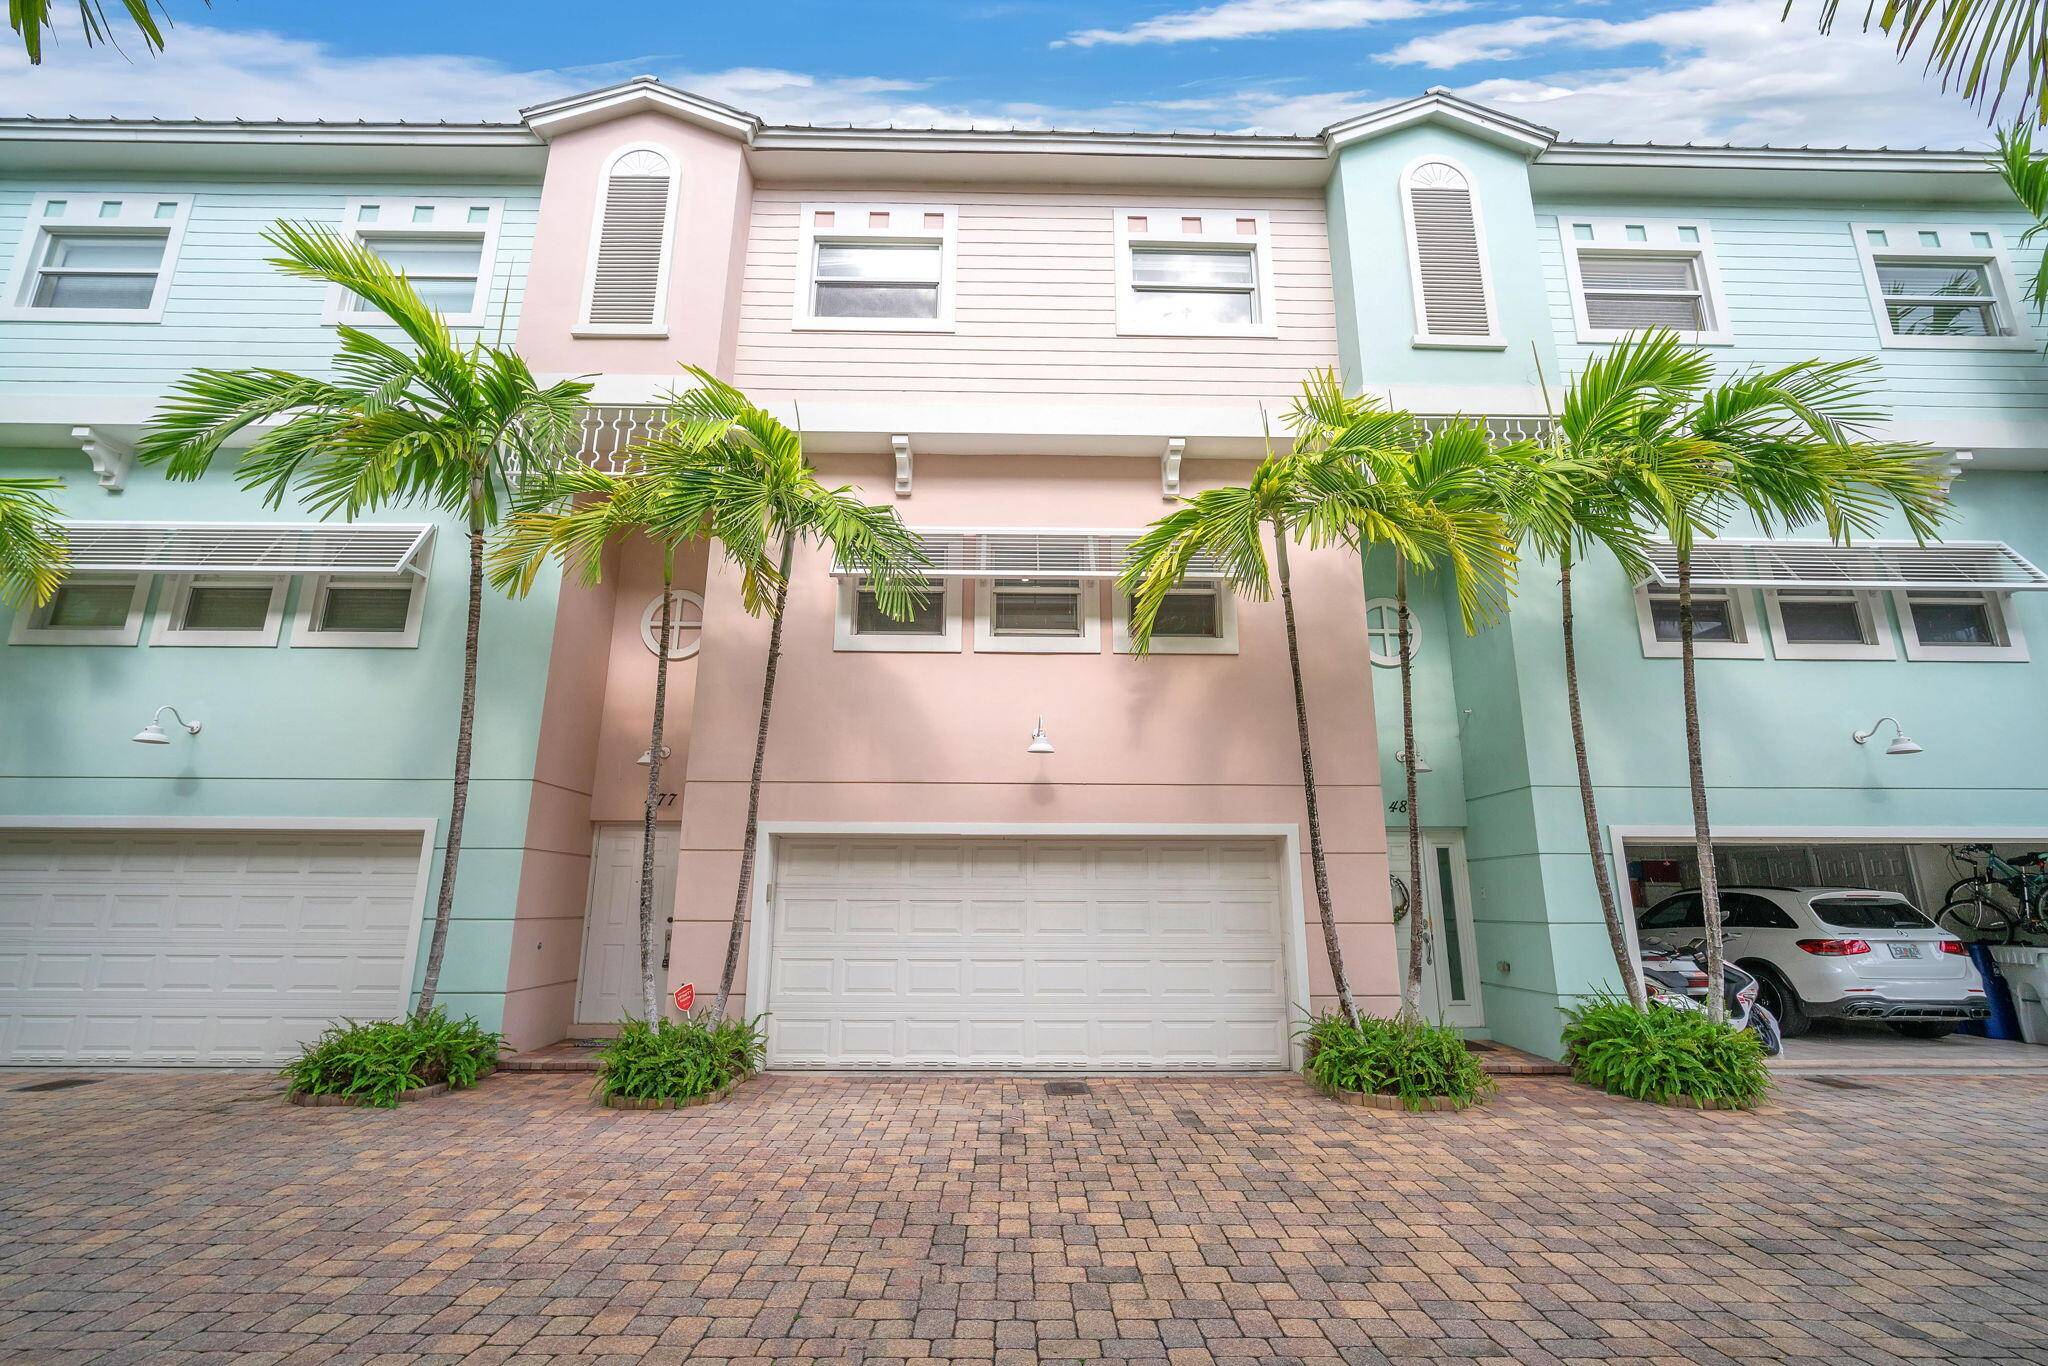 Discover coastal living at its finest in this upgraded Pompano Beach townhome, just 1 mile from the beach.